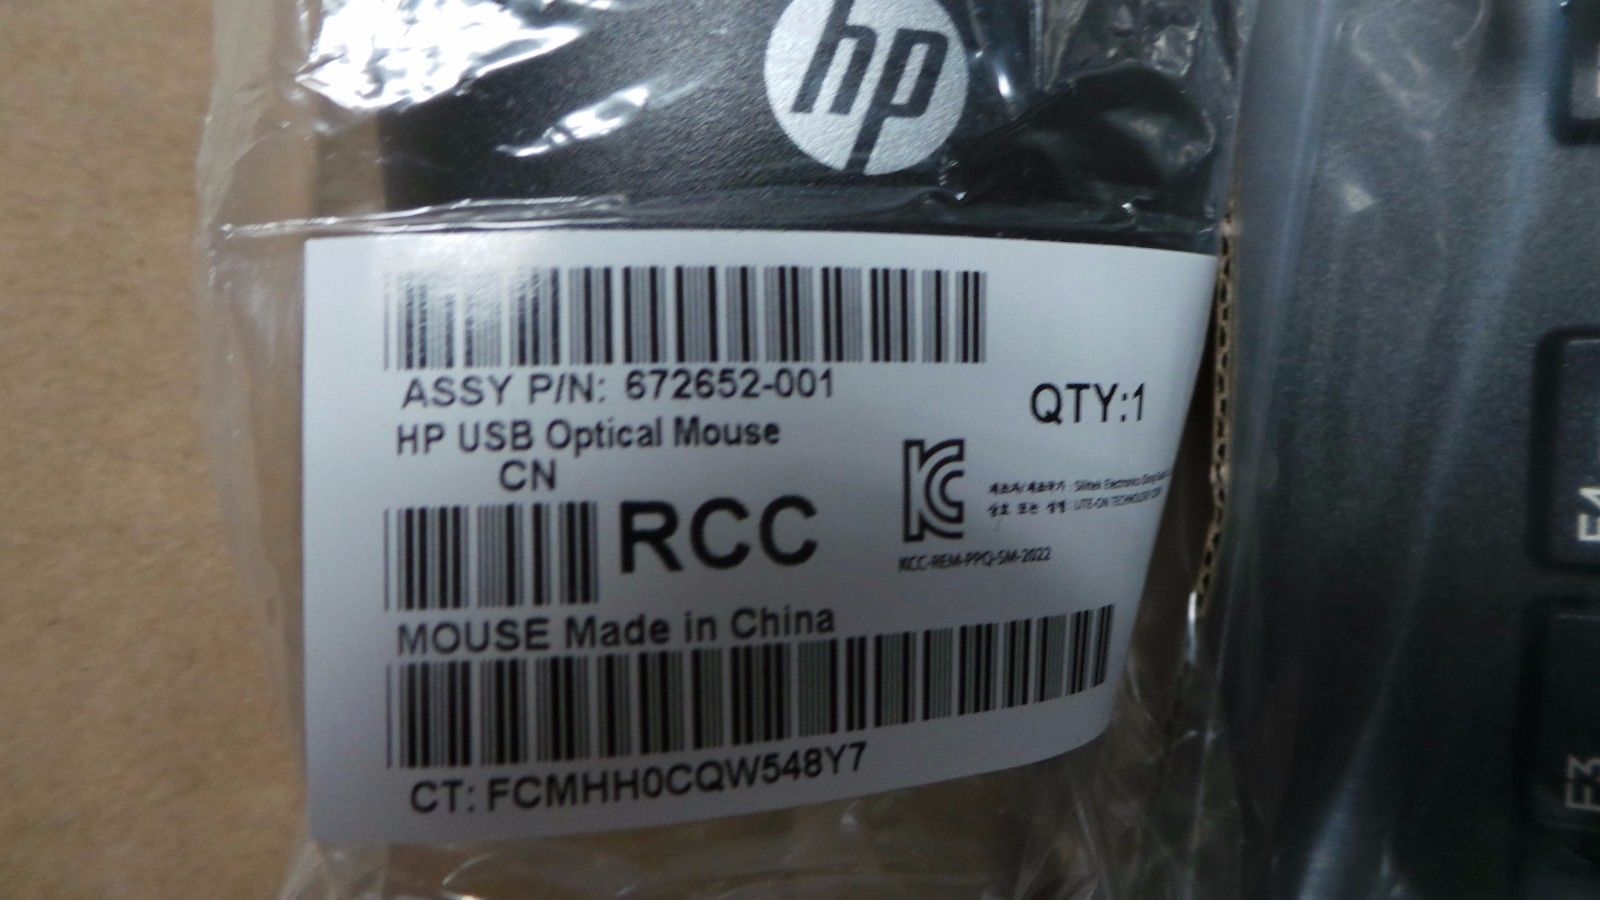 NOTES:  You are purchasing a 5 pack of HP Mouse and 5 pack of HP Keyboards.  Part number on the mice is 672652-001  Part number on the keyboard is 803181-001  All items are unused.  USB wired.